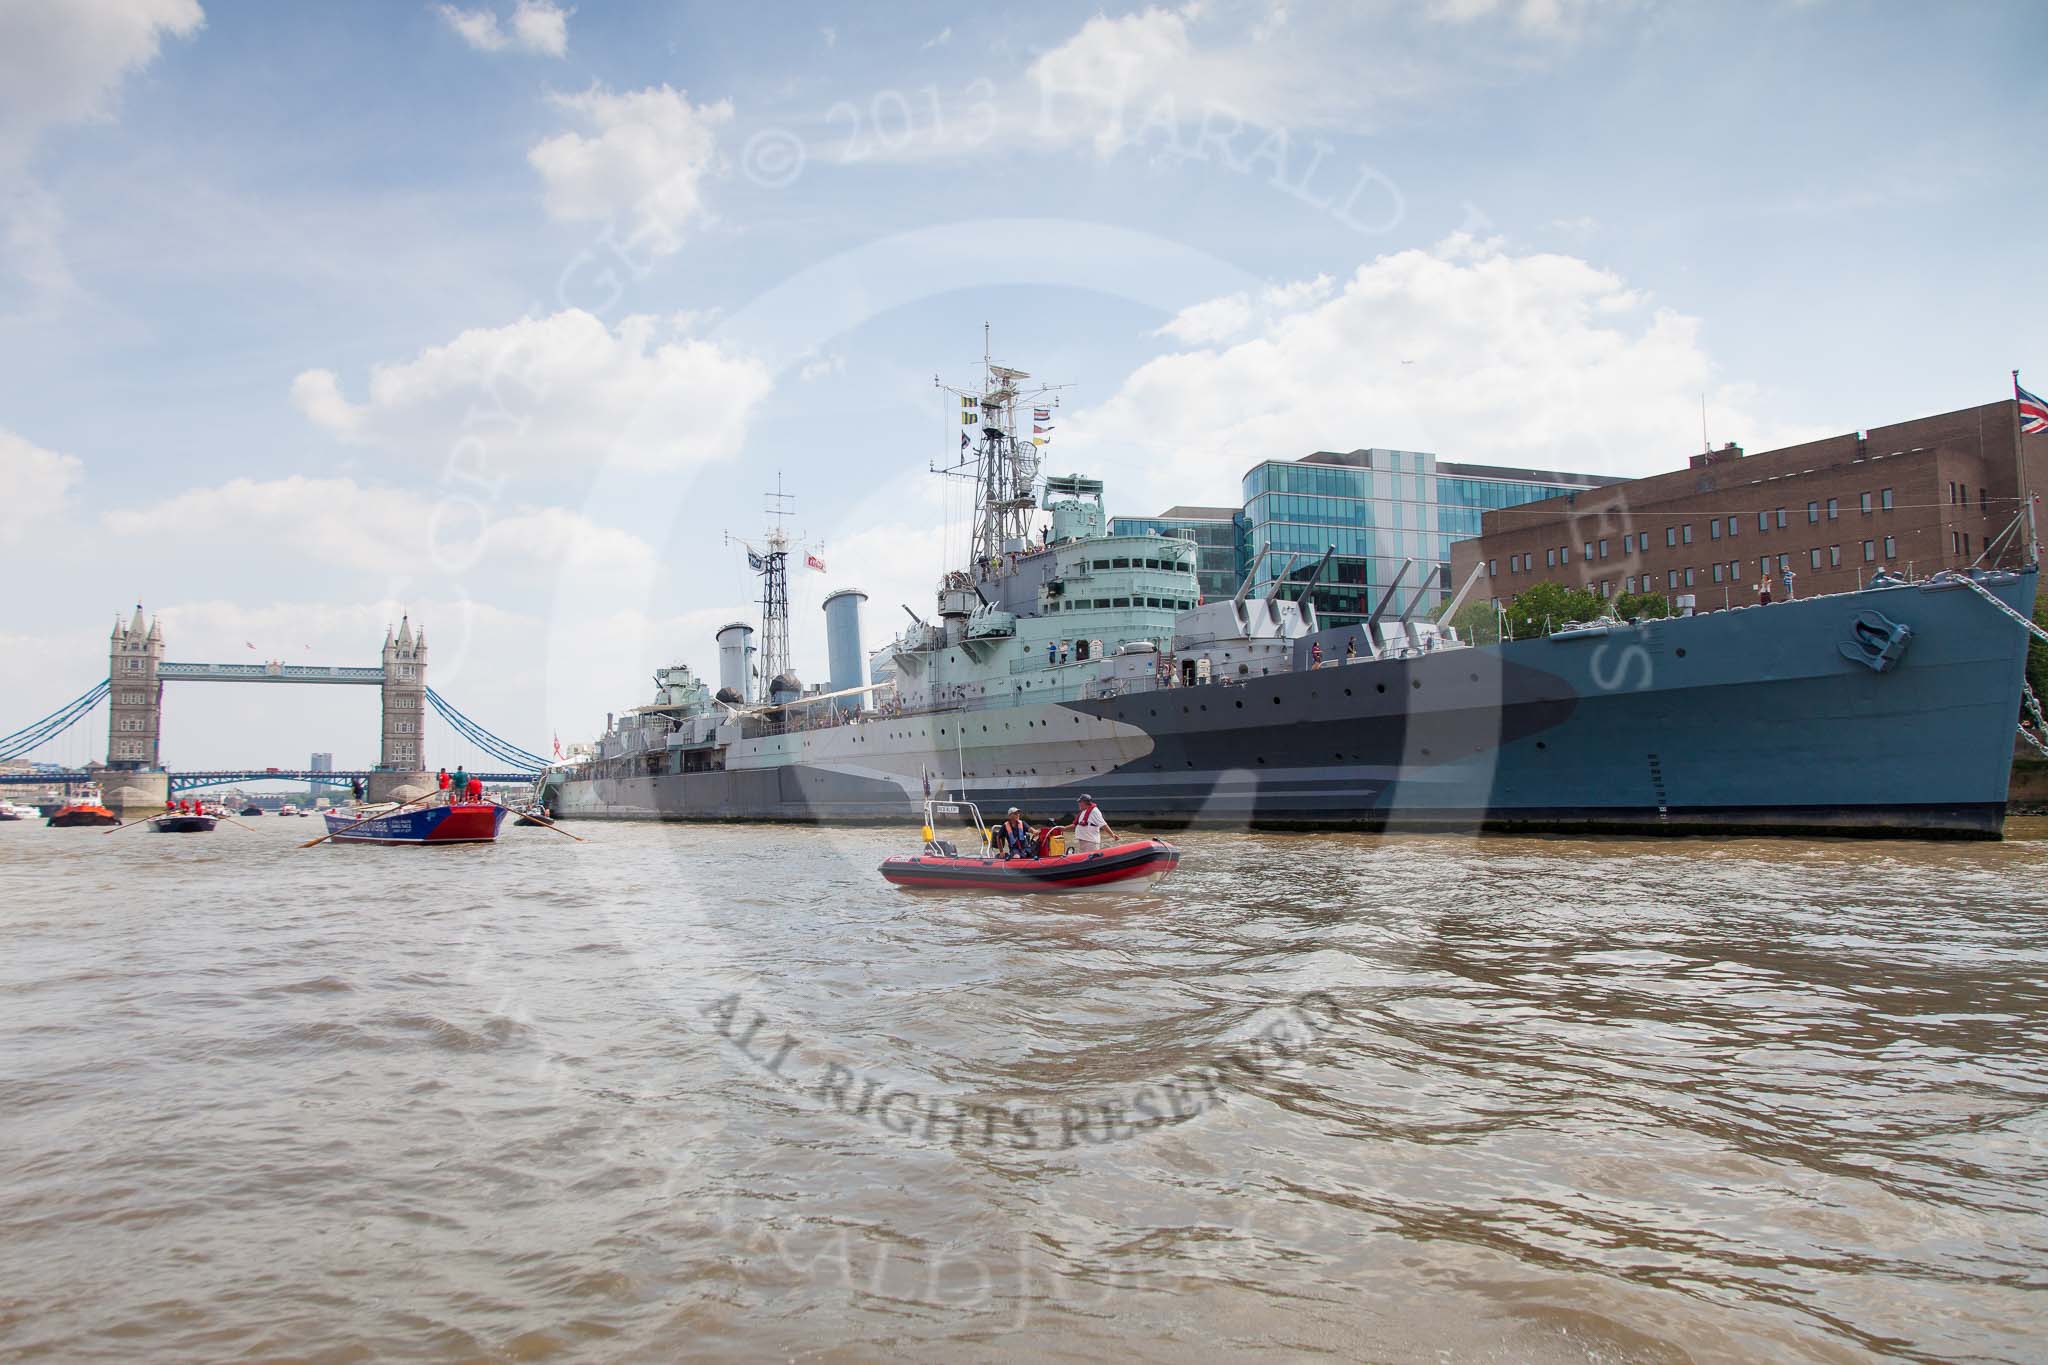 TOW River Thames Barge Driving Race 2013: HMS Belfast, with the Tower Bridge behind, and barge "Steve Faldo" by Capital Pleasure Boats approaching..
River Thames between Greenwich and Westminster,
London,

United Kingdom,
on 13 July 2013 at 13:48, image #397